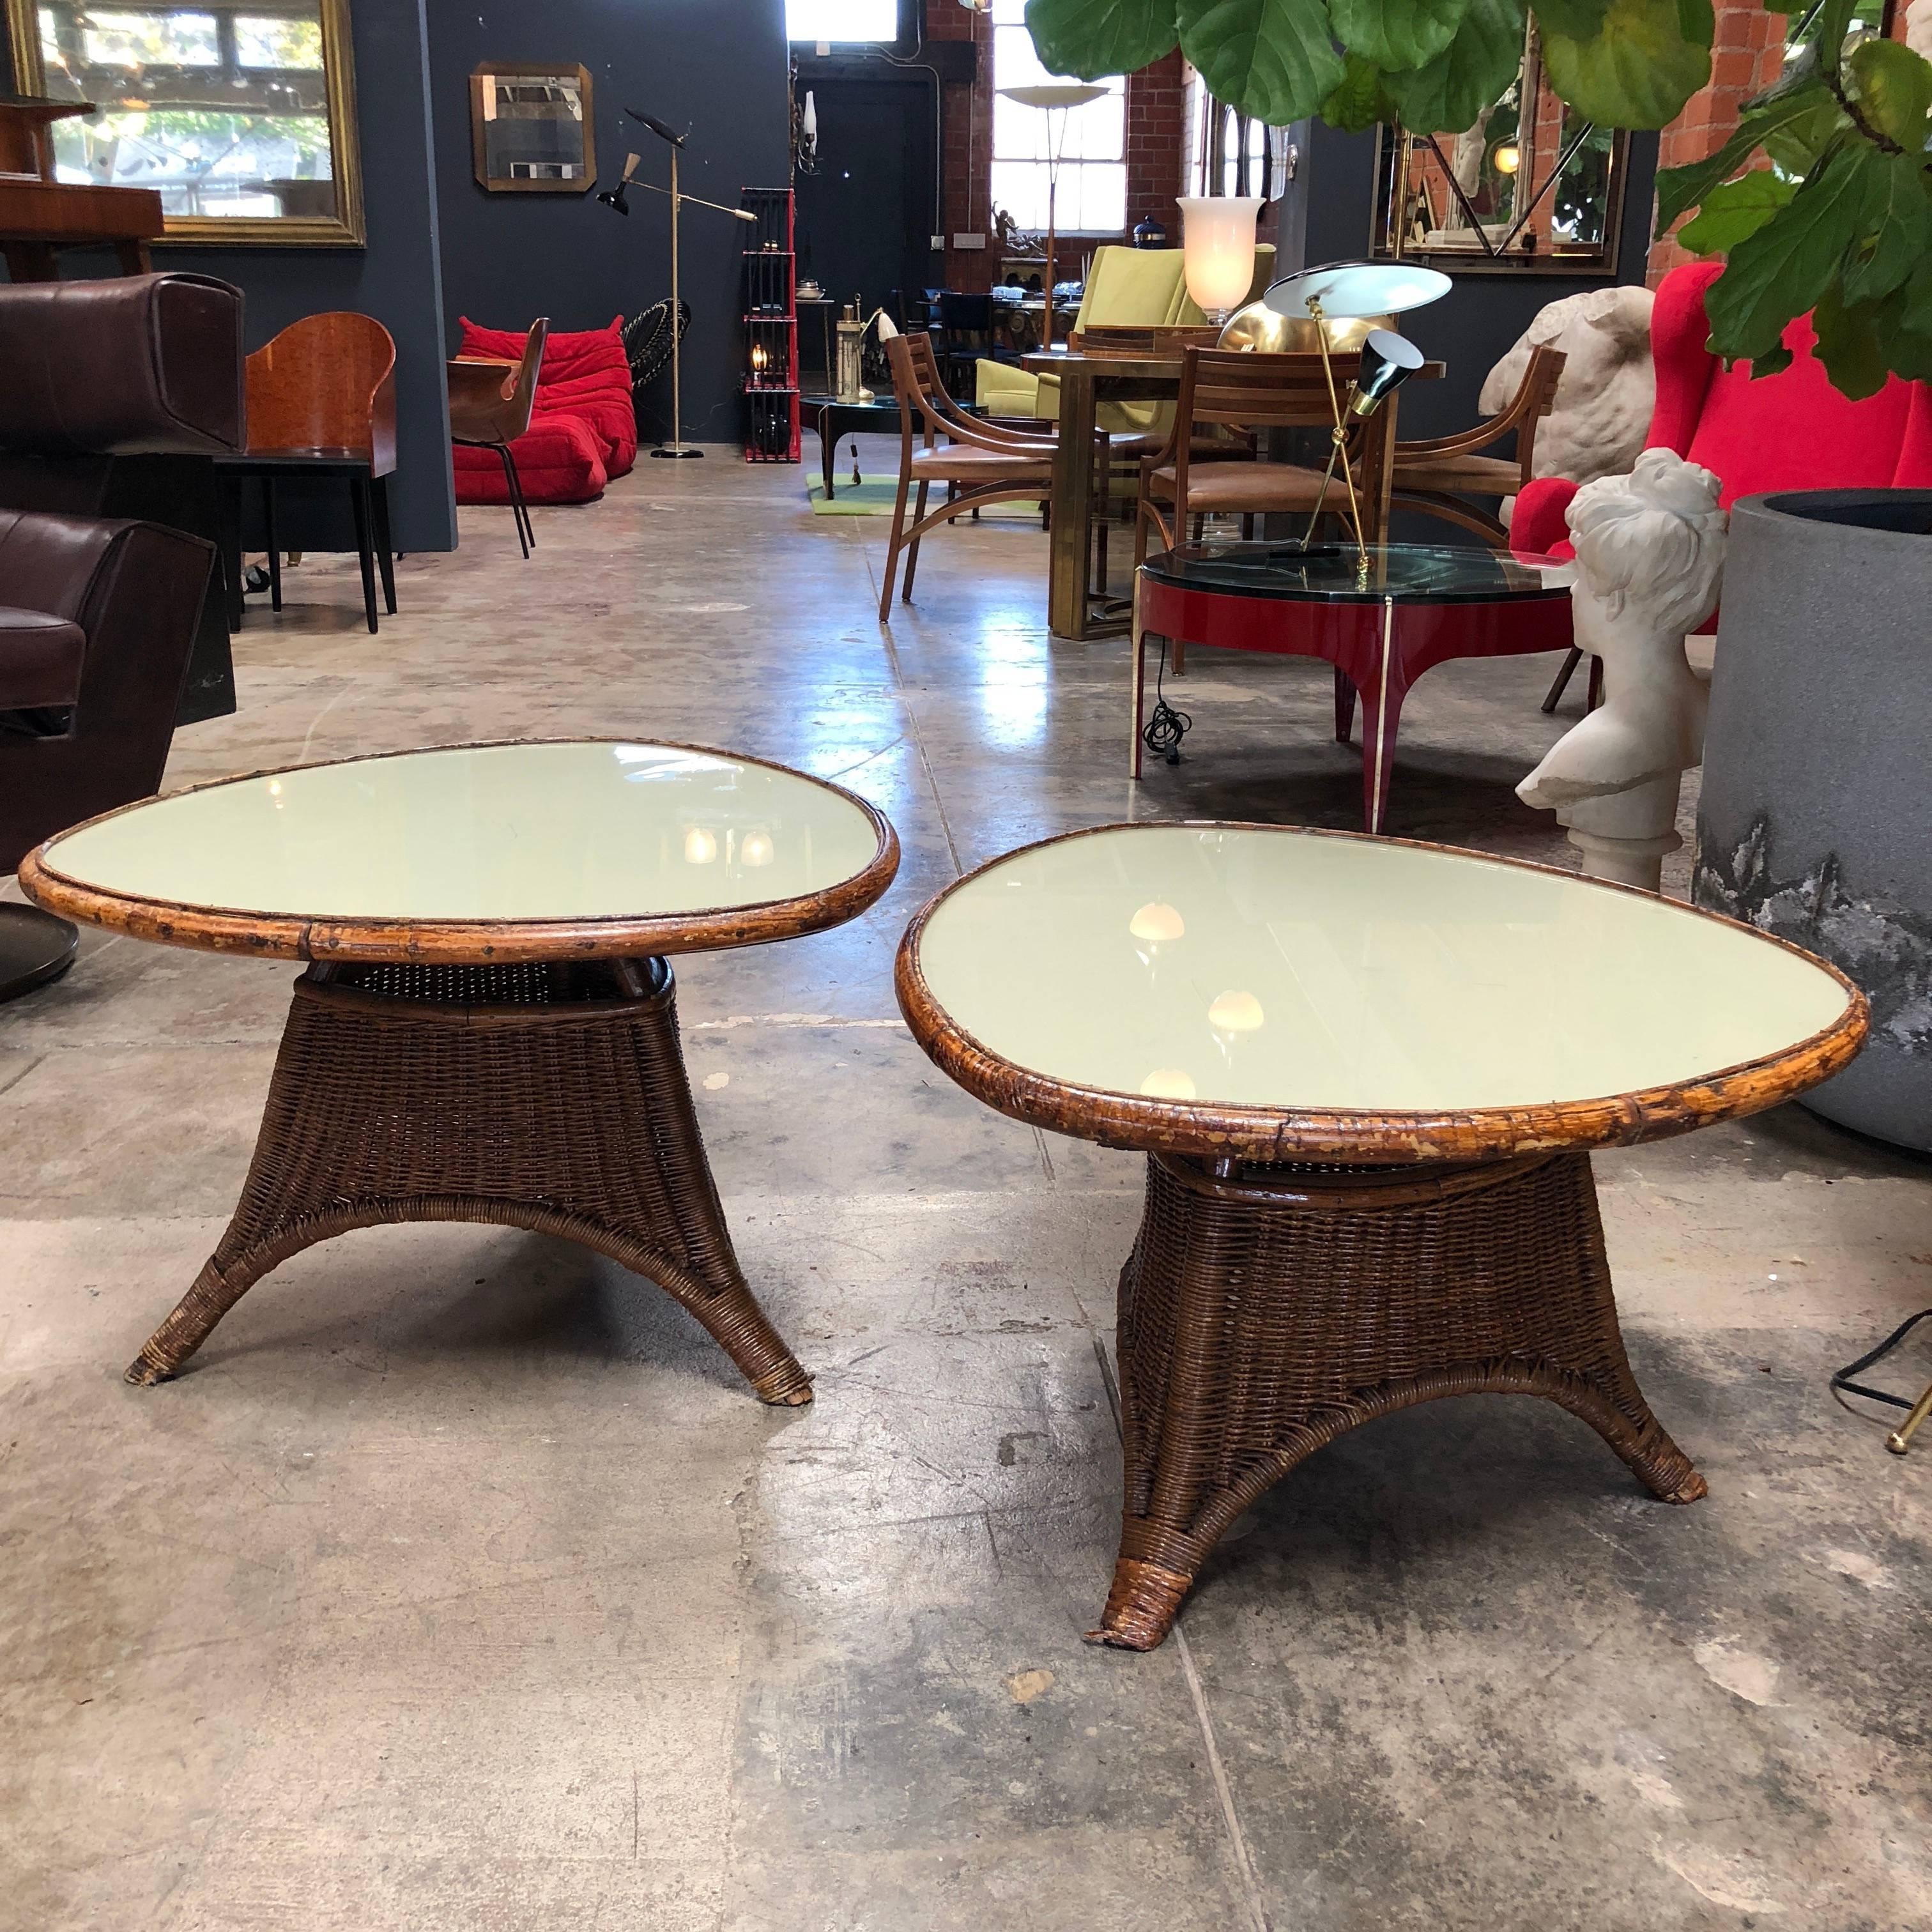 Placed side by side they would even make an interesting coffee table. The rattan bases makes these interesting tables light weight and easily moved from place to place. Their natural fibres pair nicely with Mid-Century Modern décor but look equally